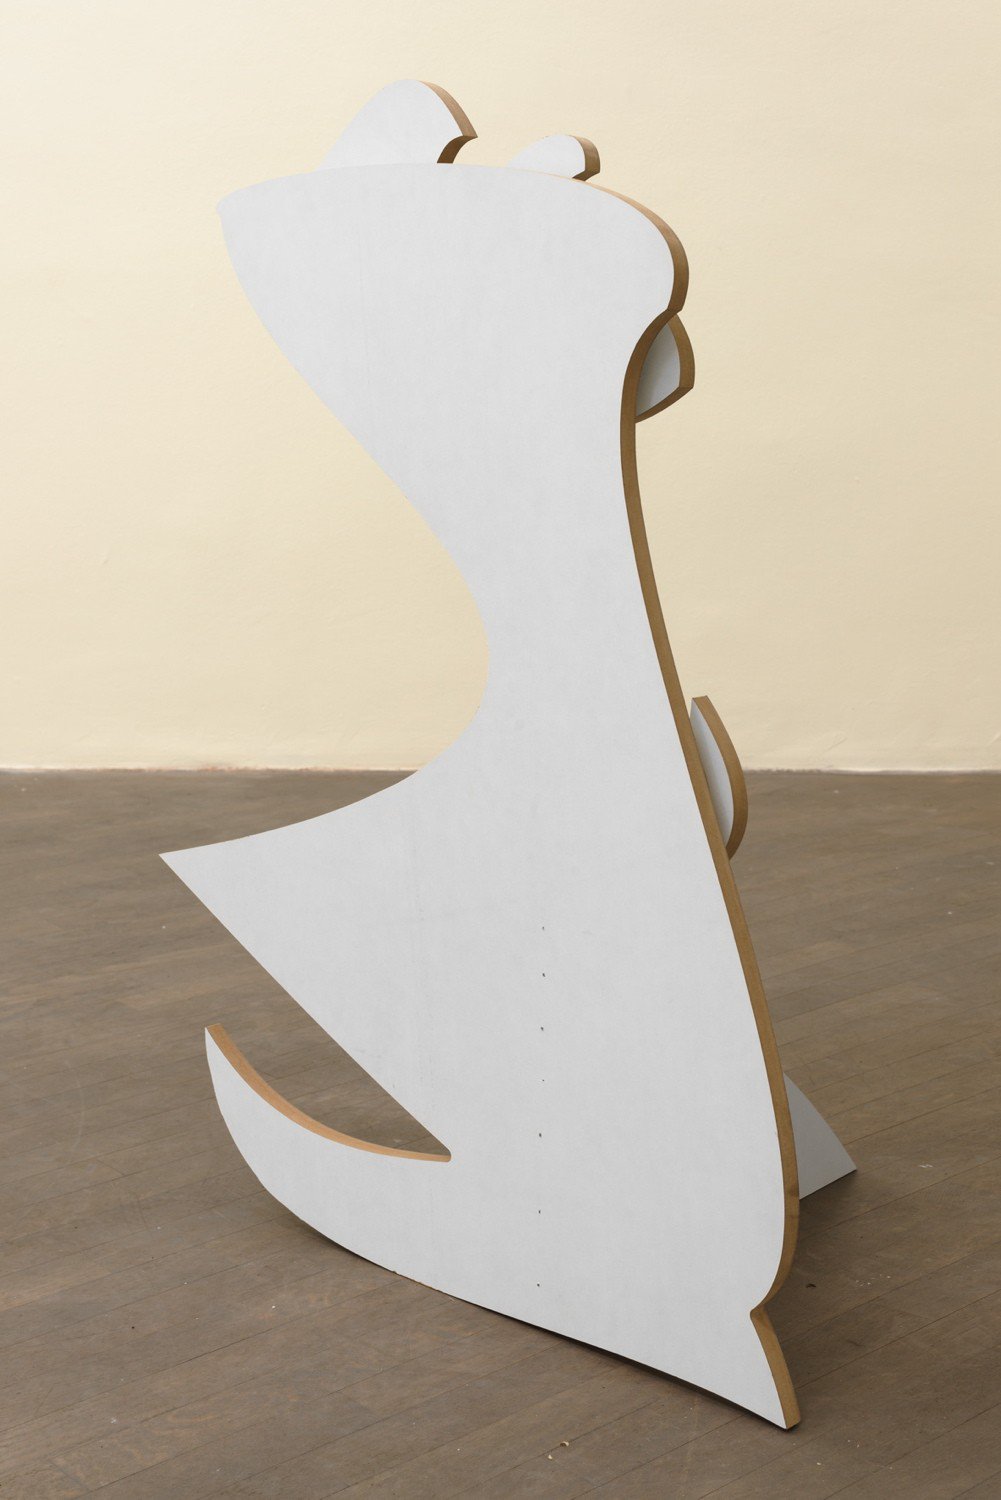 Andy BootUntitled, 2013Wood, stapler103 x 67 x 38 cm